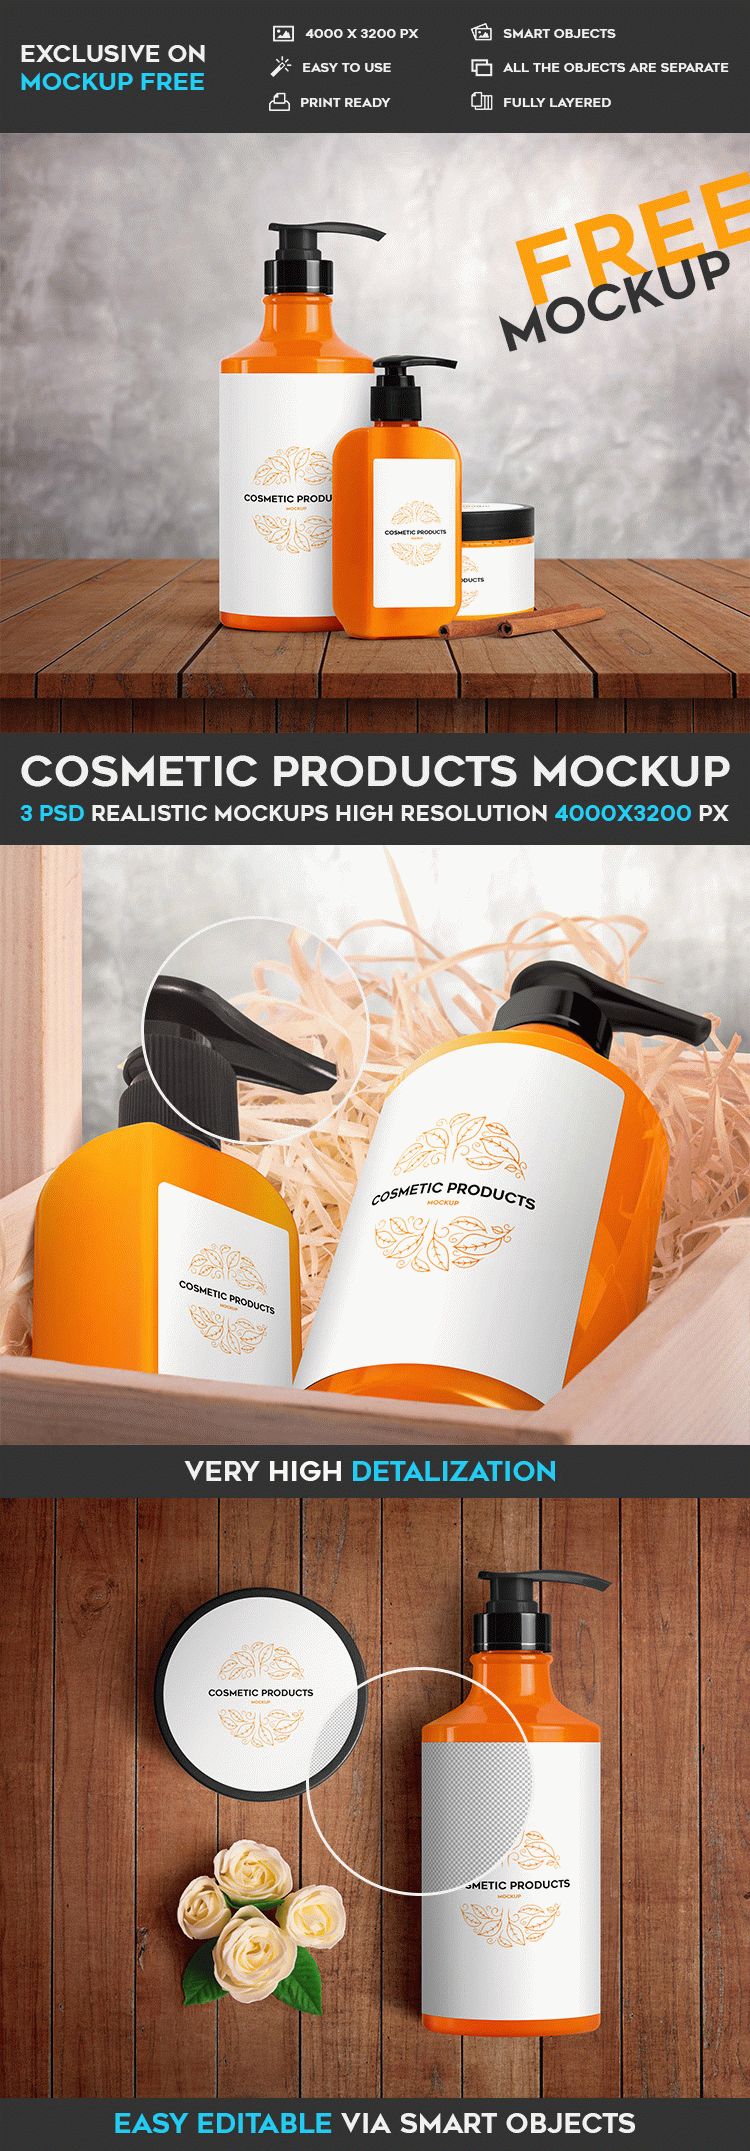 bigpreview_cosmetic-products-mockup-template-free-in-psd